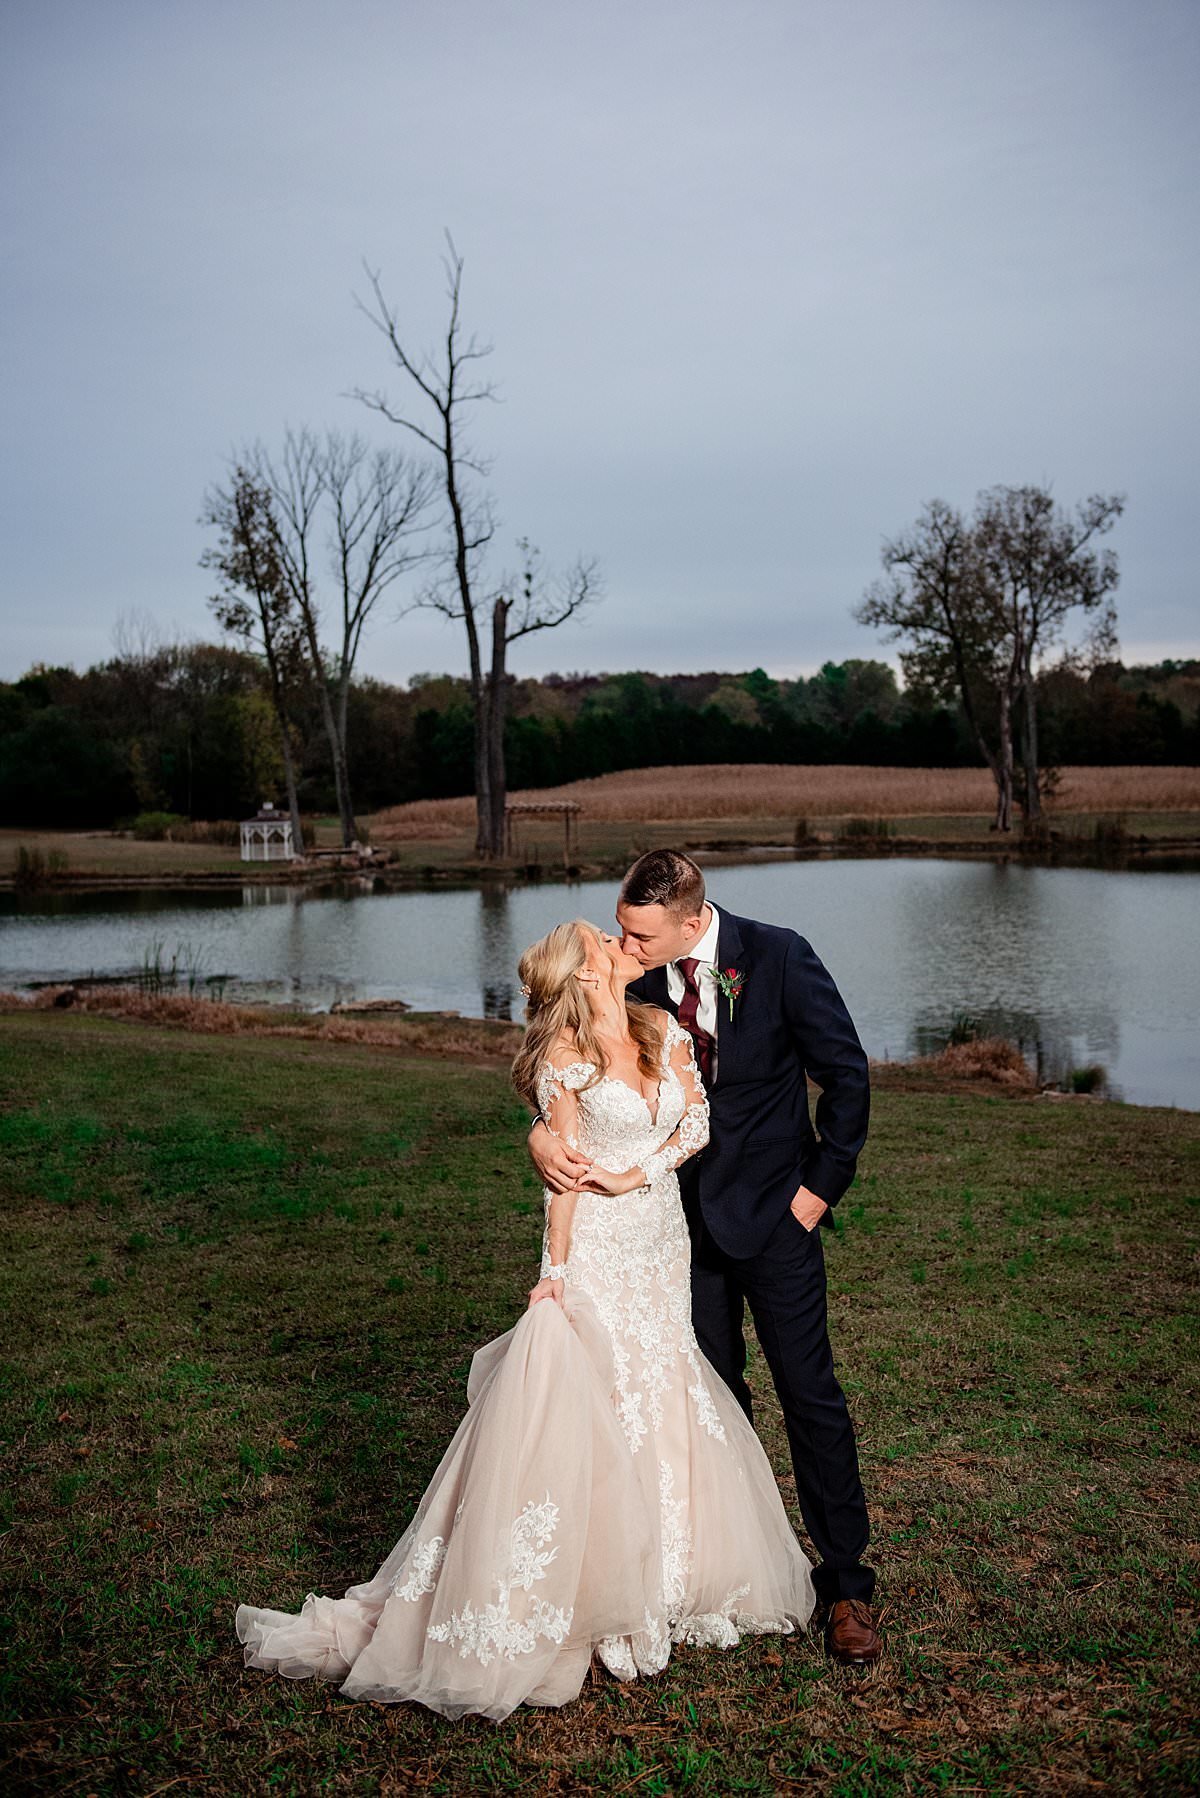 Romantic sunset wedding photo of bride and groom standing next to the pond at Rural Hill Farm